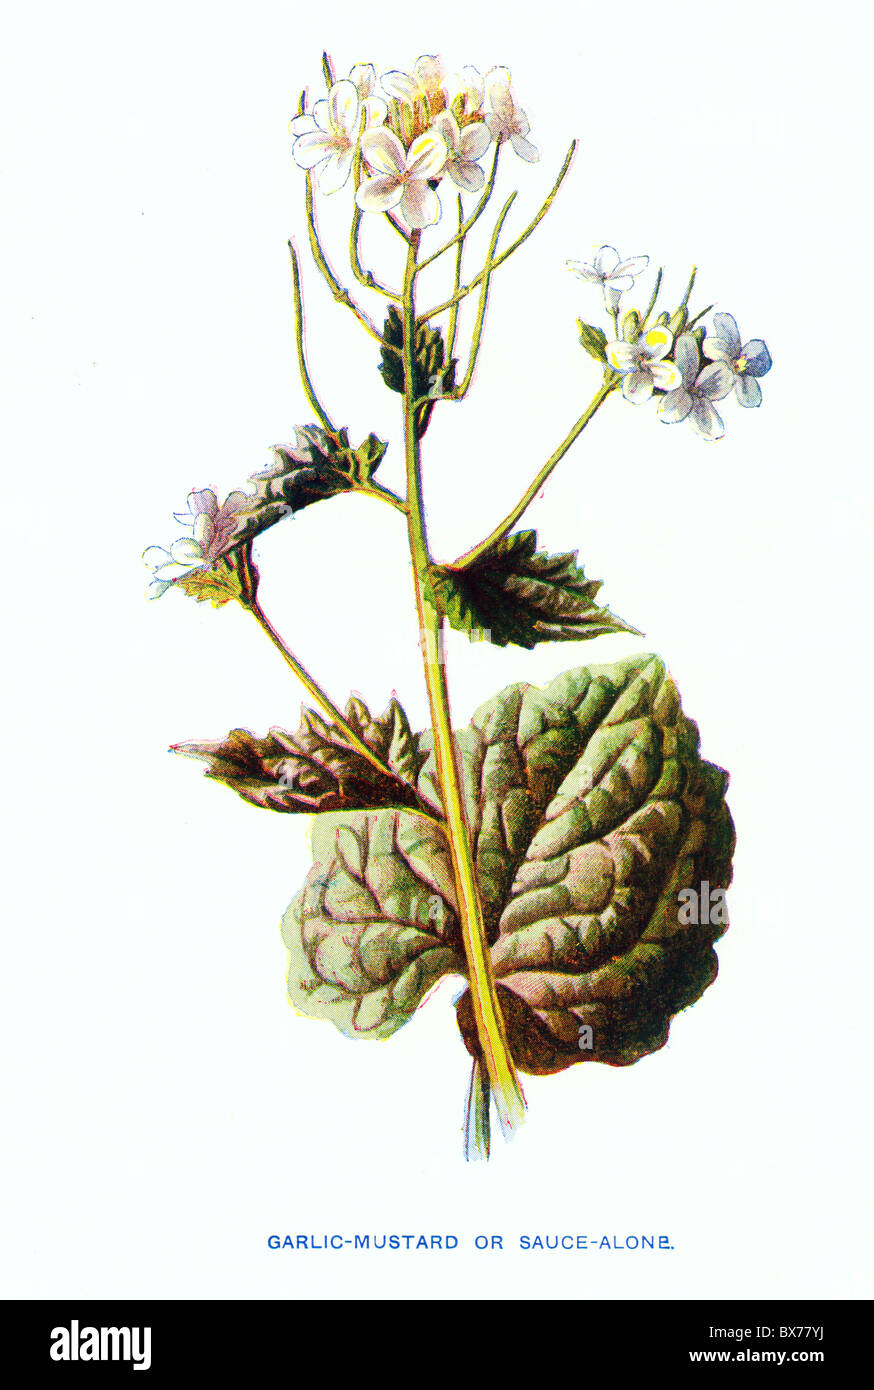 Garlic Mustard or Sauce-alone (Alliaria petiolata) from Familiar Wild Flowers by F. Edward Hulme; Colour Lithograph Stock Photo